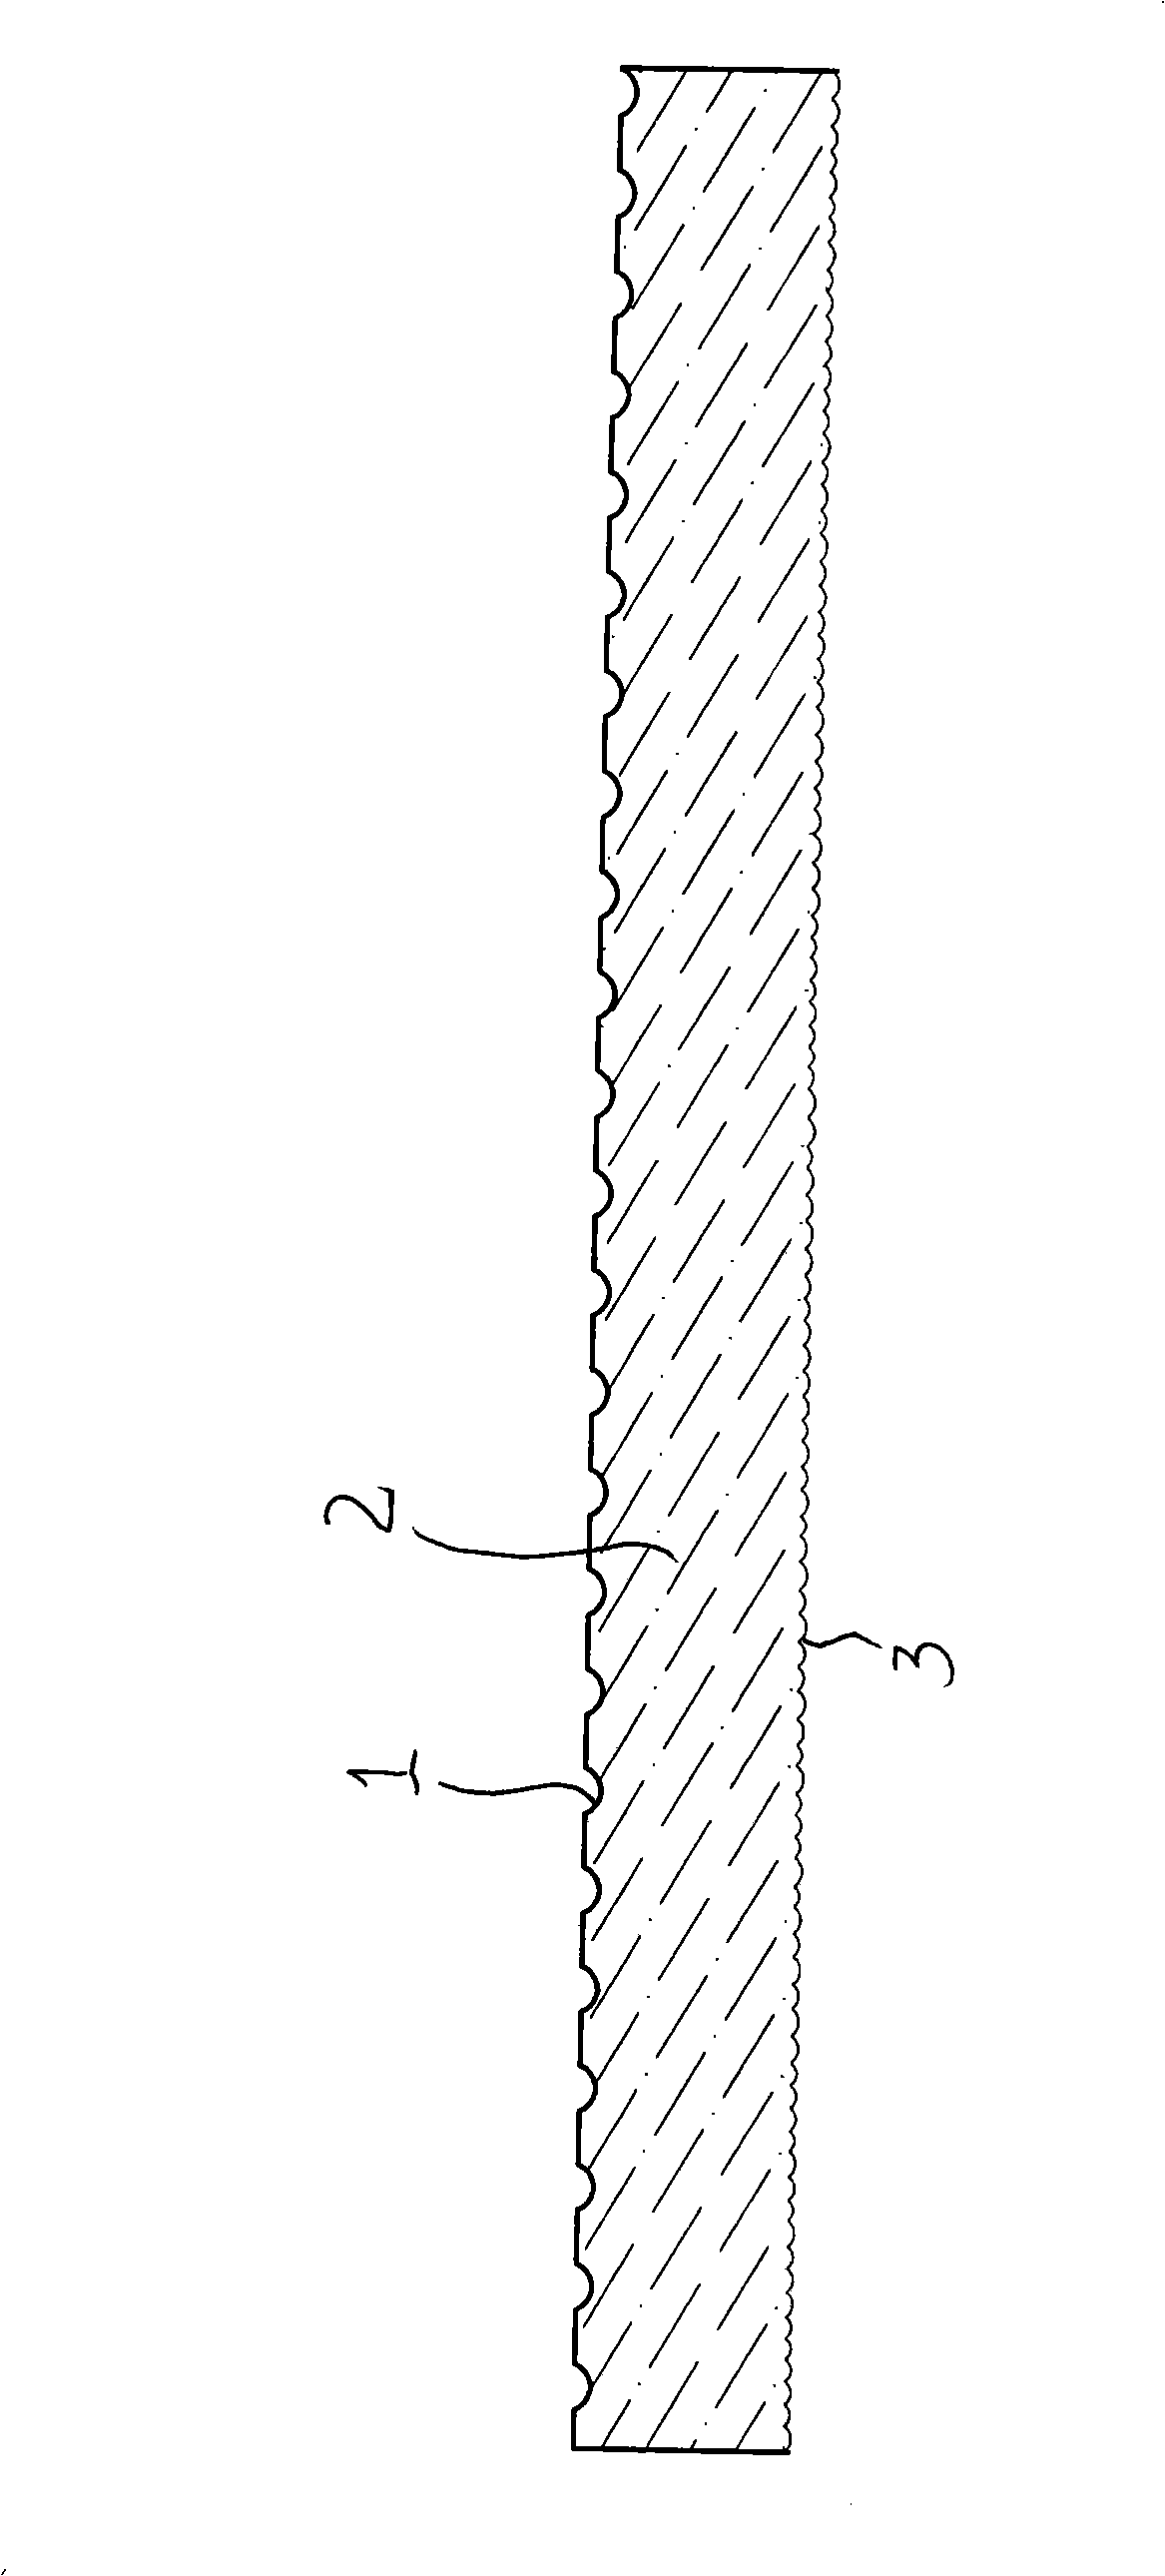 Slide board for railway passenger dedicated line bridge support, modified ultra-high molecular weight polyethylene and production method for producing the slide board